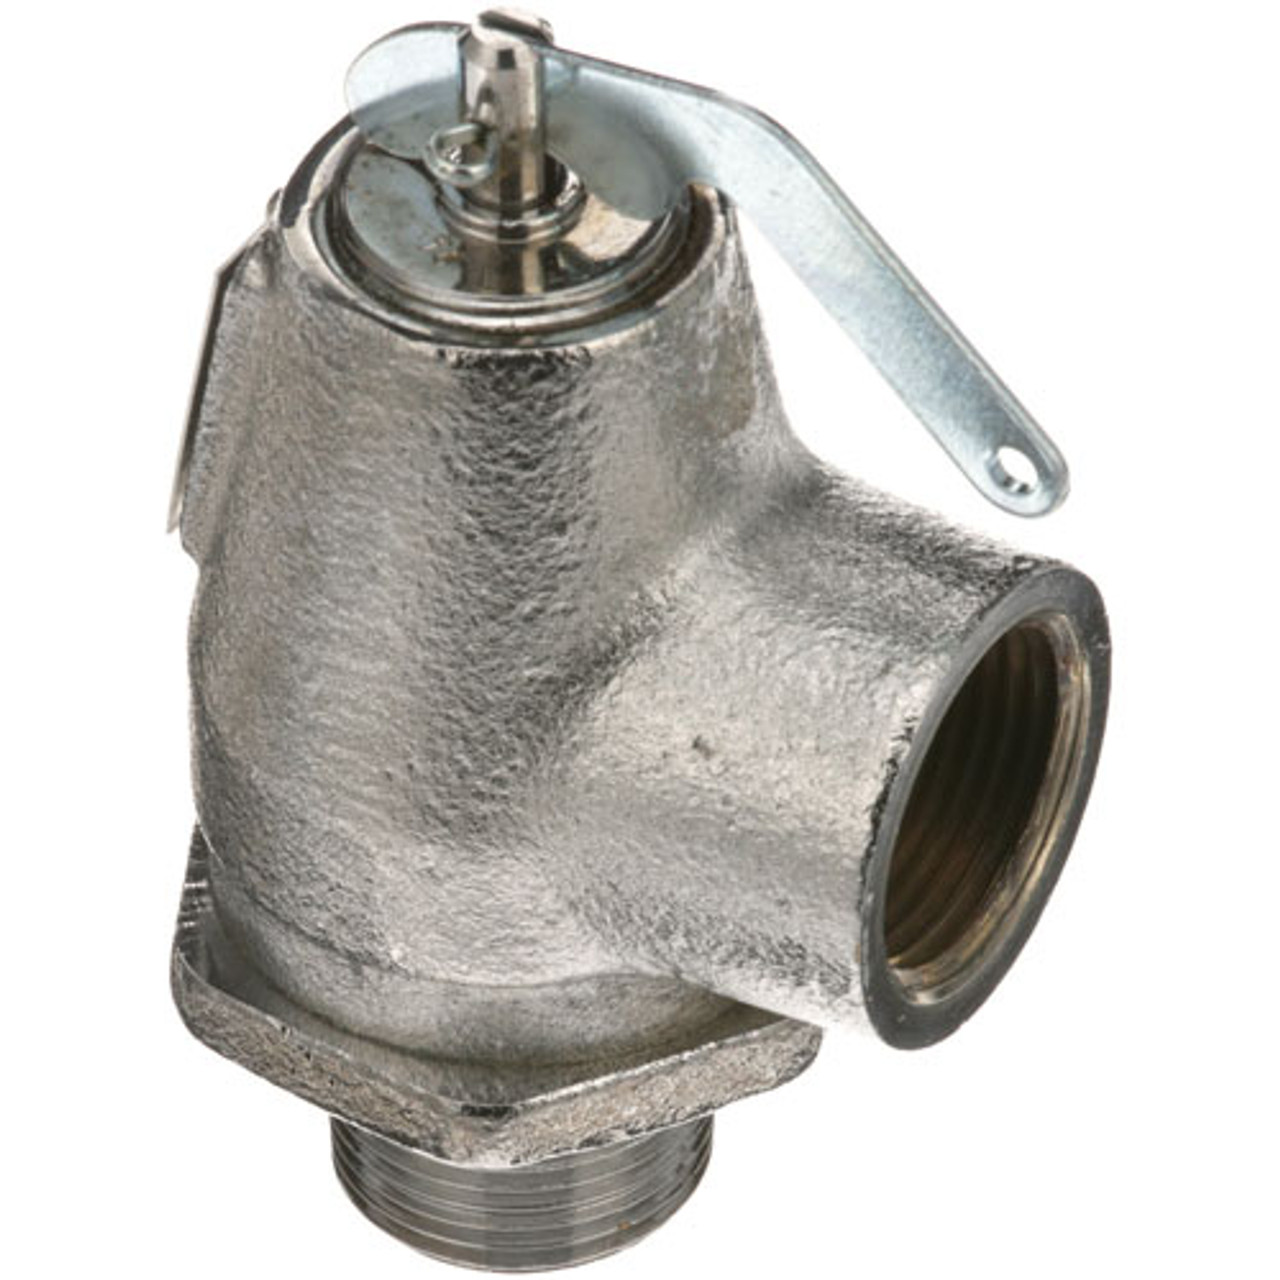 Safety Valve 3/4"M X 3/4"F - Replacement Part For Market Forge S20-0019